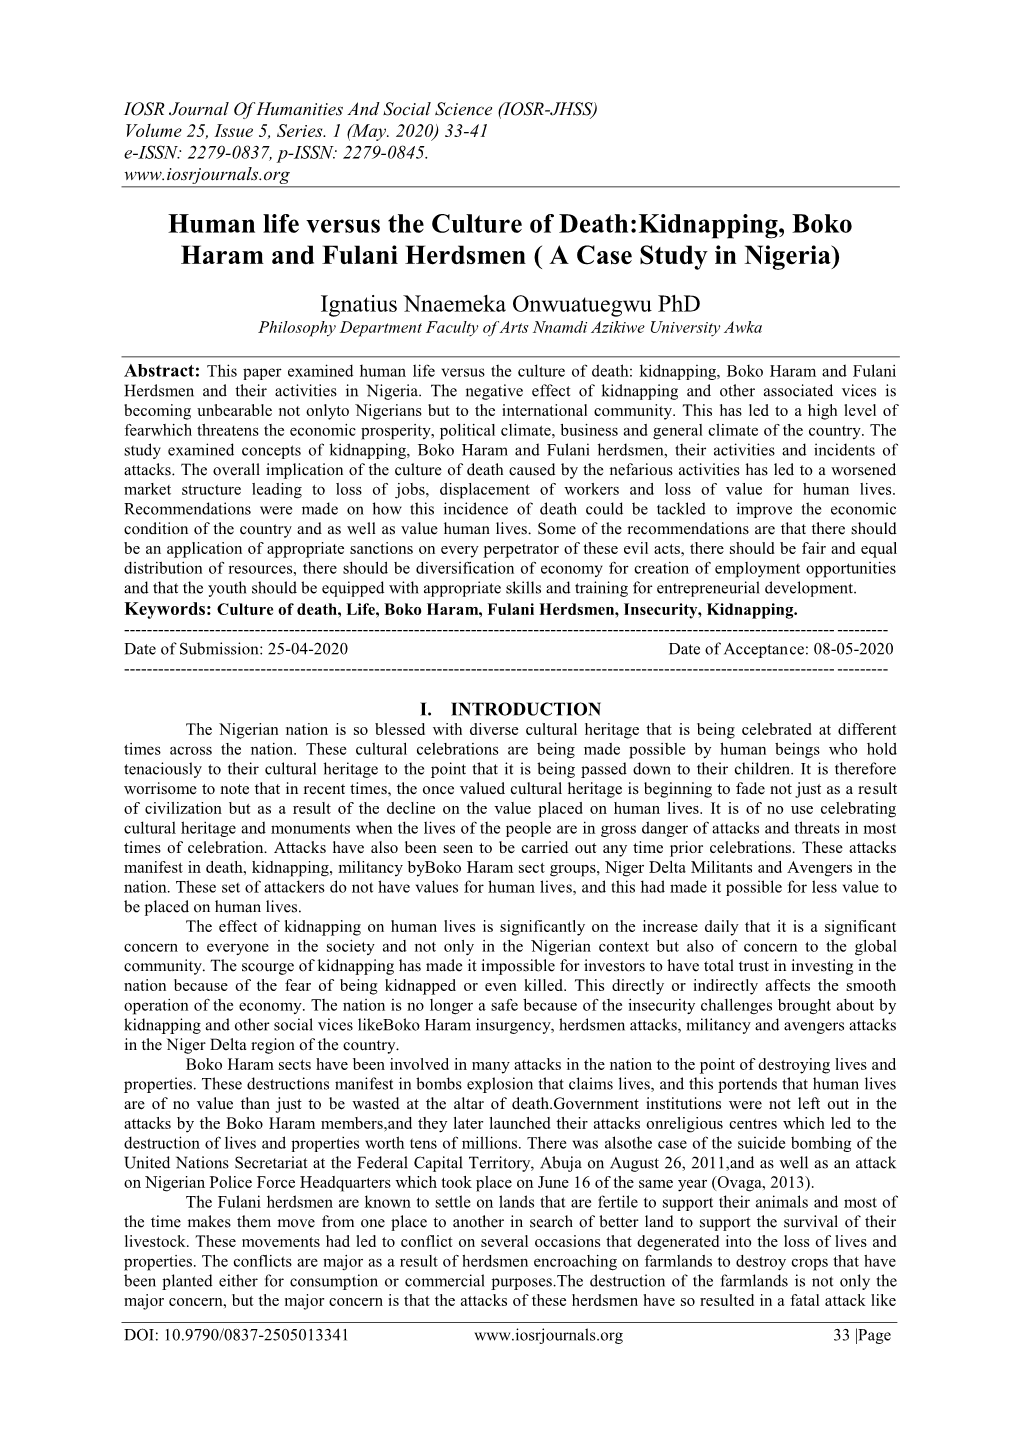 Human Life Versus the Culture of Death:Kidnapping, Boko Haram and Fulani Herdsmen ( a Case Study in Nigeria)